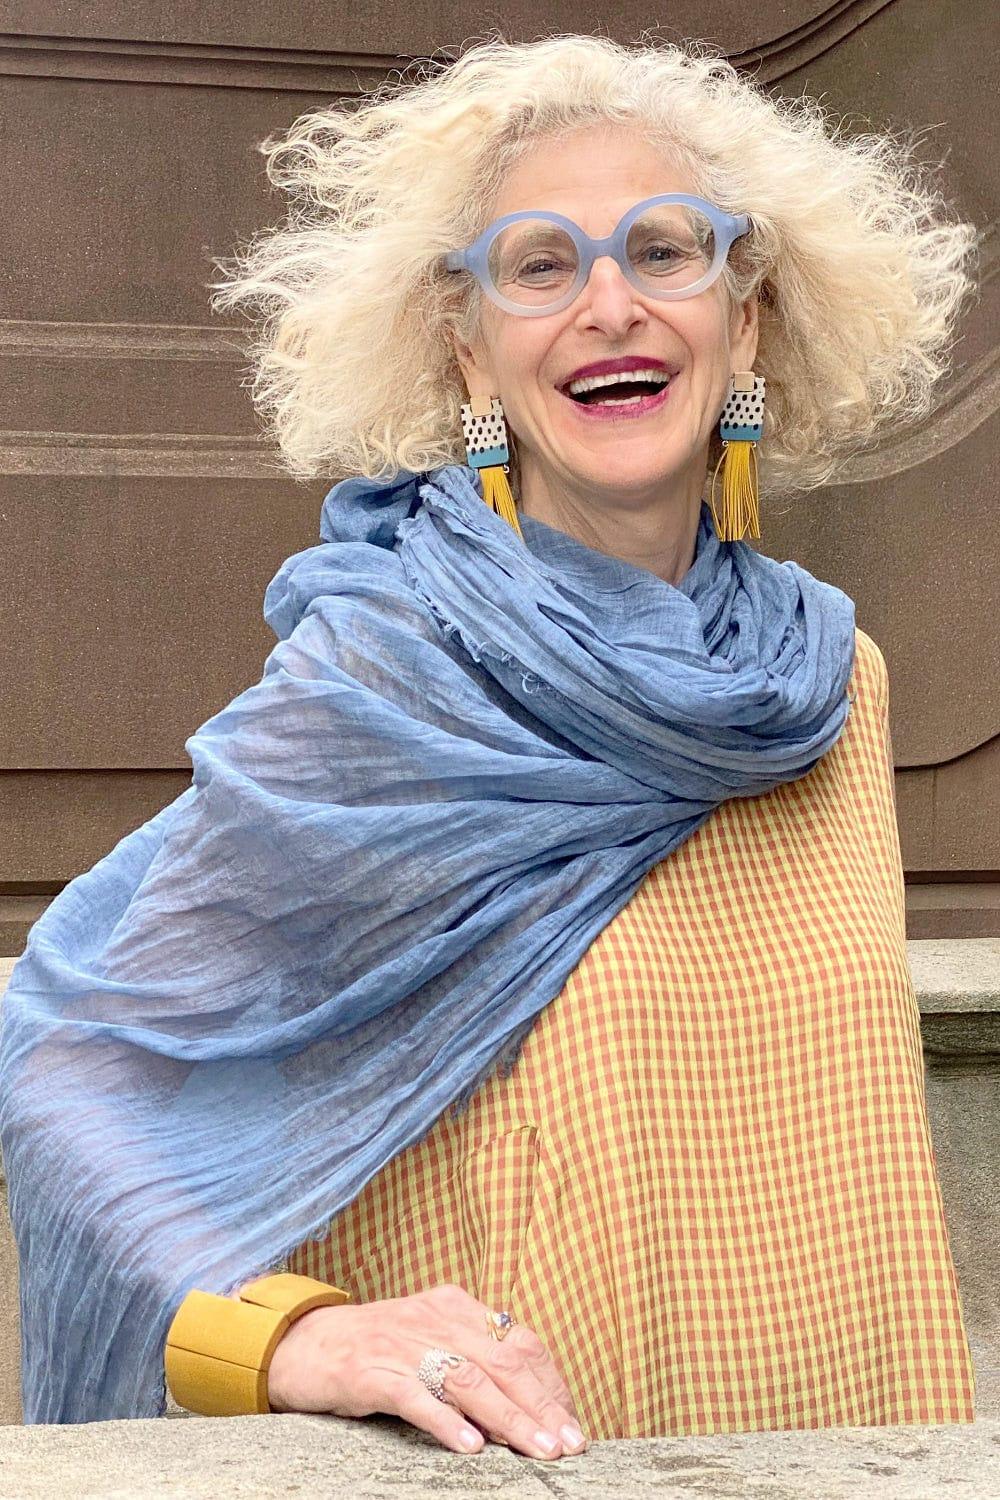 Woman wearing tassel earrings, blue scarf and a small check dress. She is wearing fun blue rimmed glasses and looks very stylish and happy.